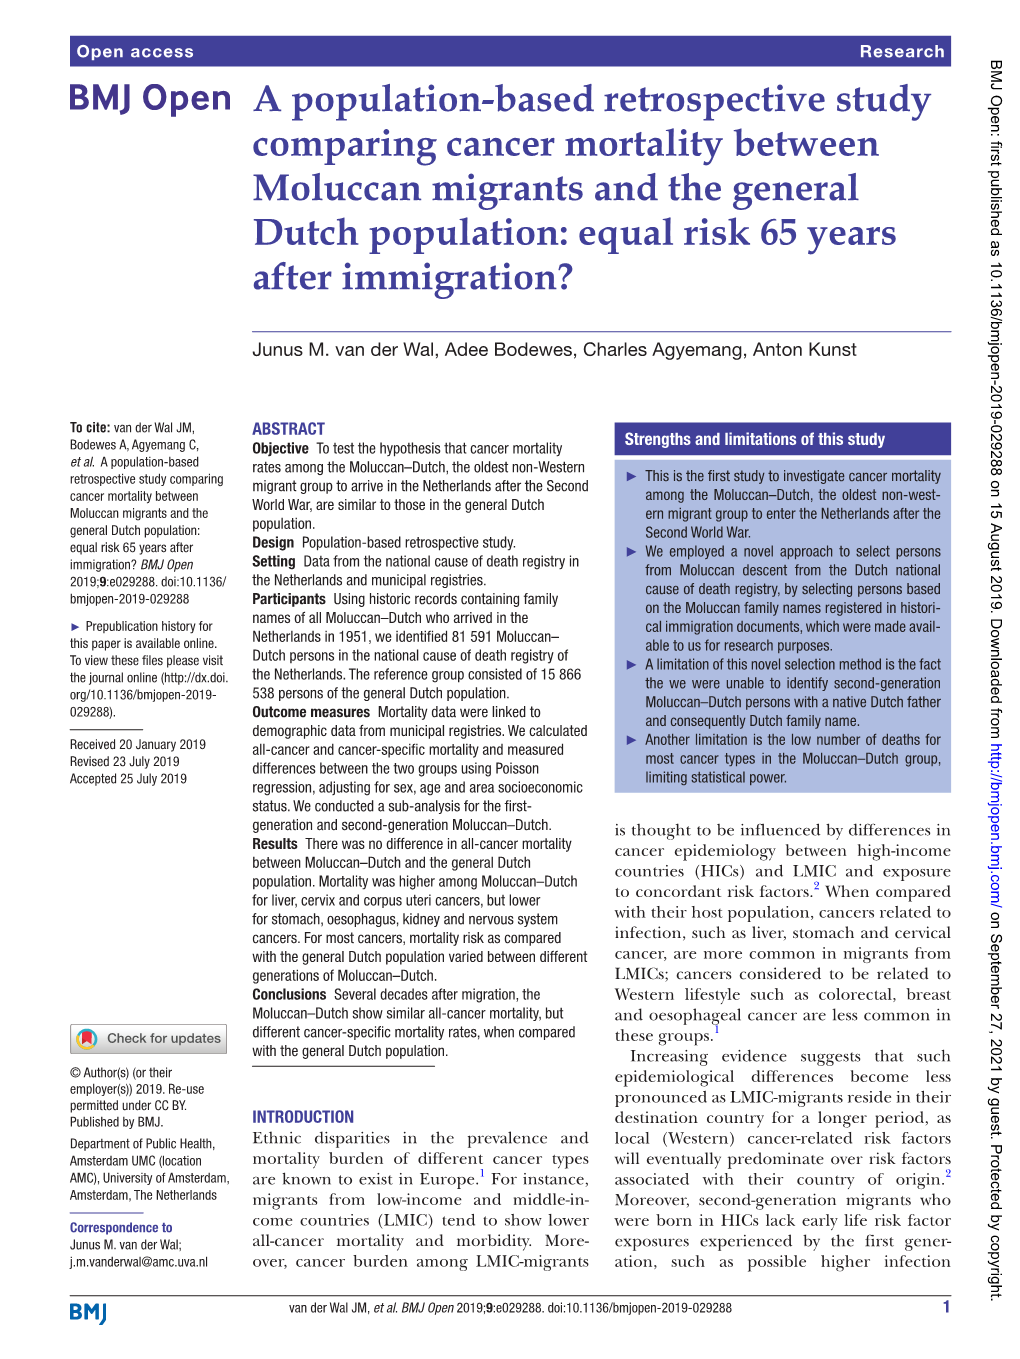 A Population-Based Retrospective Study Comparing Cancer Mortality Between Moluccan Migrants and the General Dutch Population: Equal Risk 65 Years After Immigration?